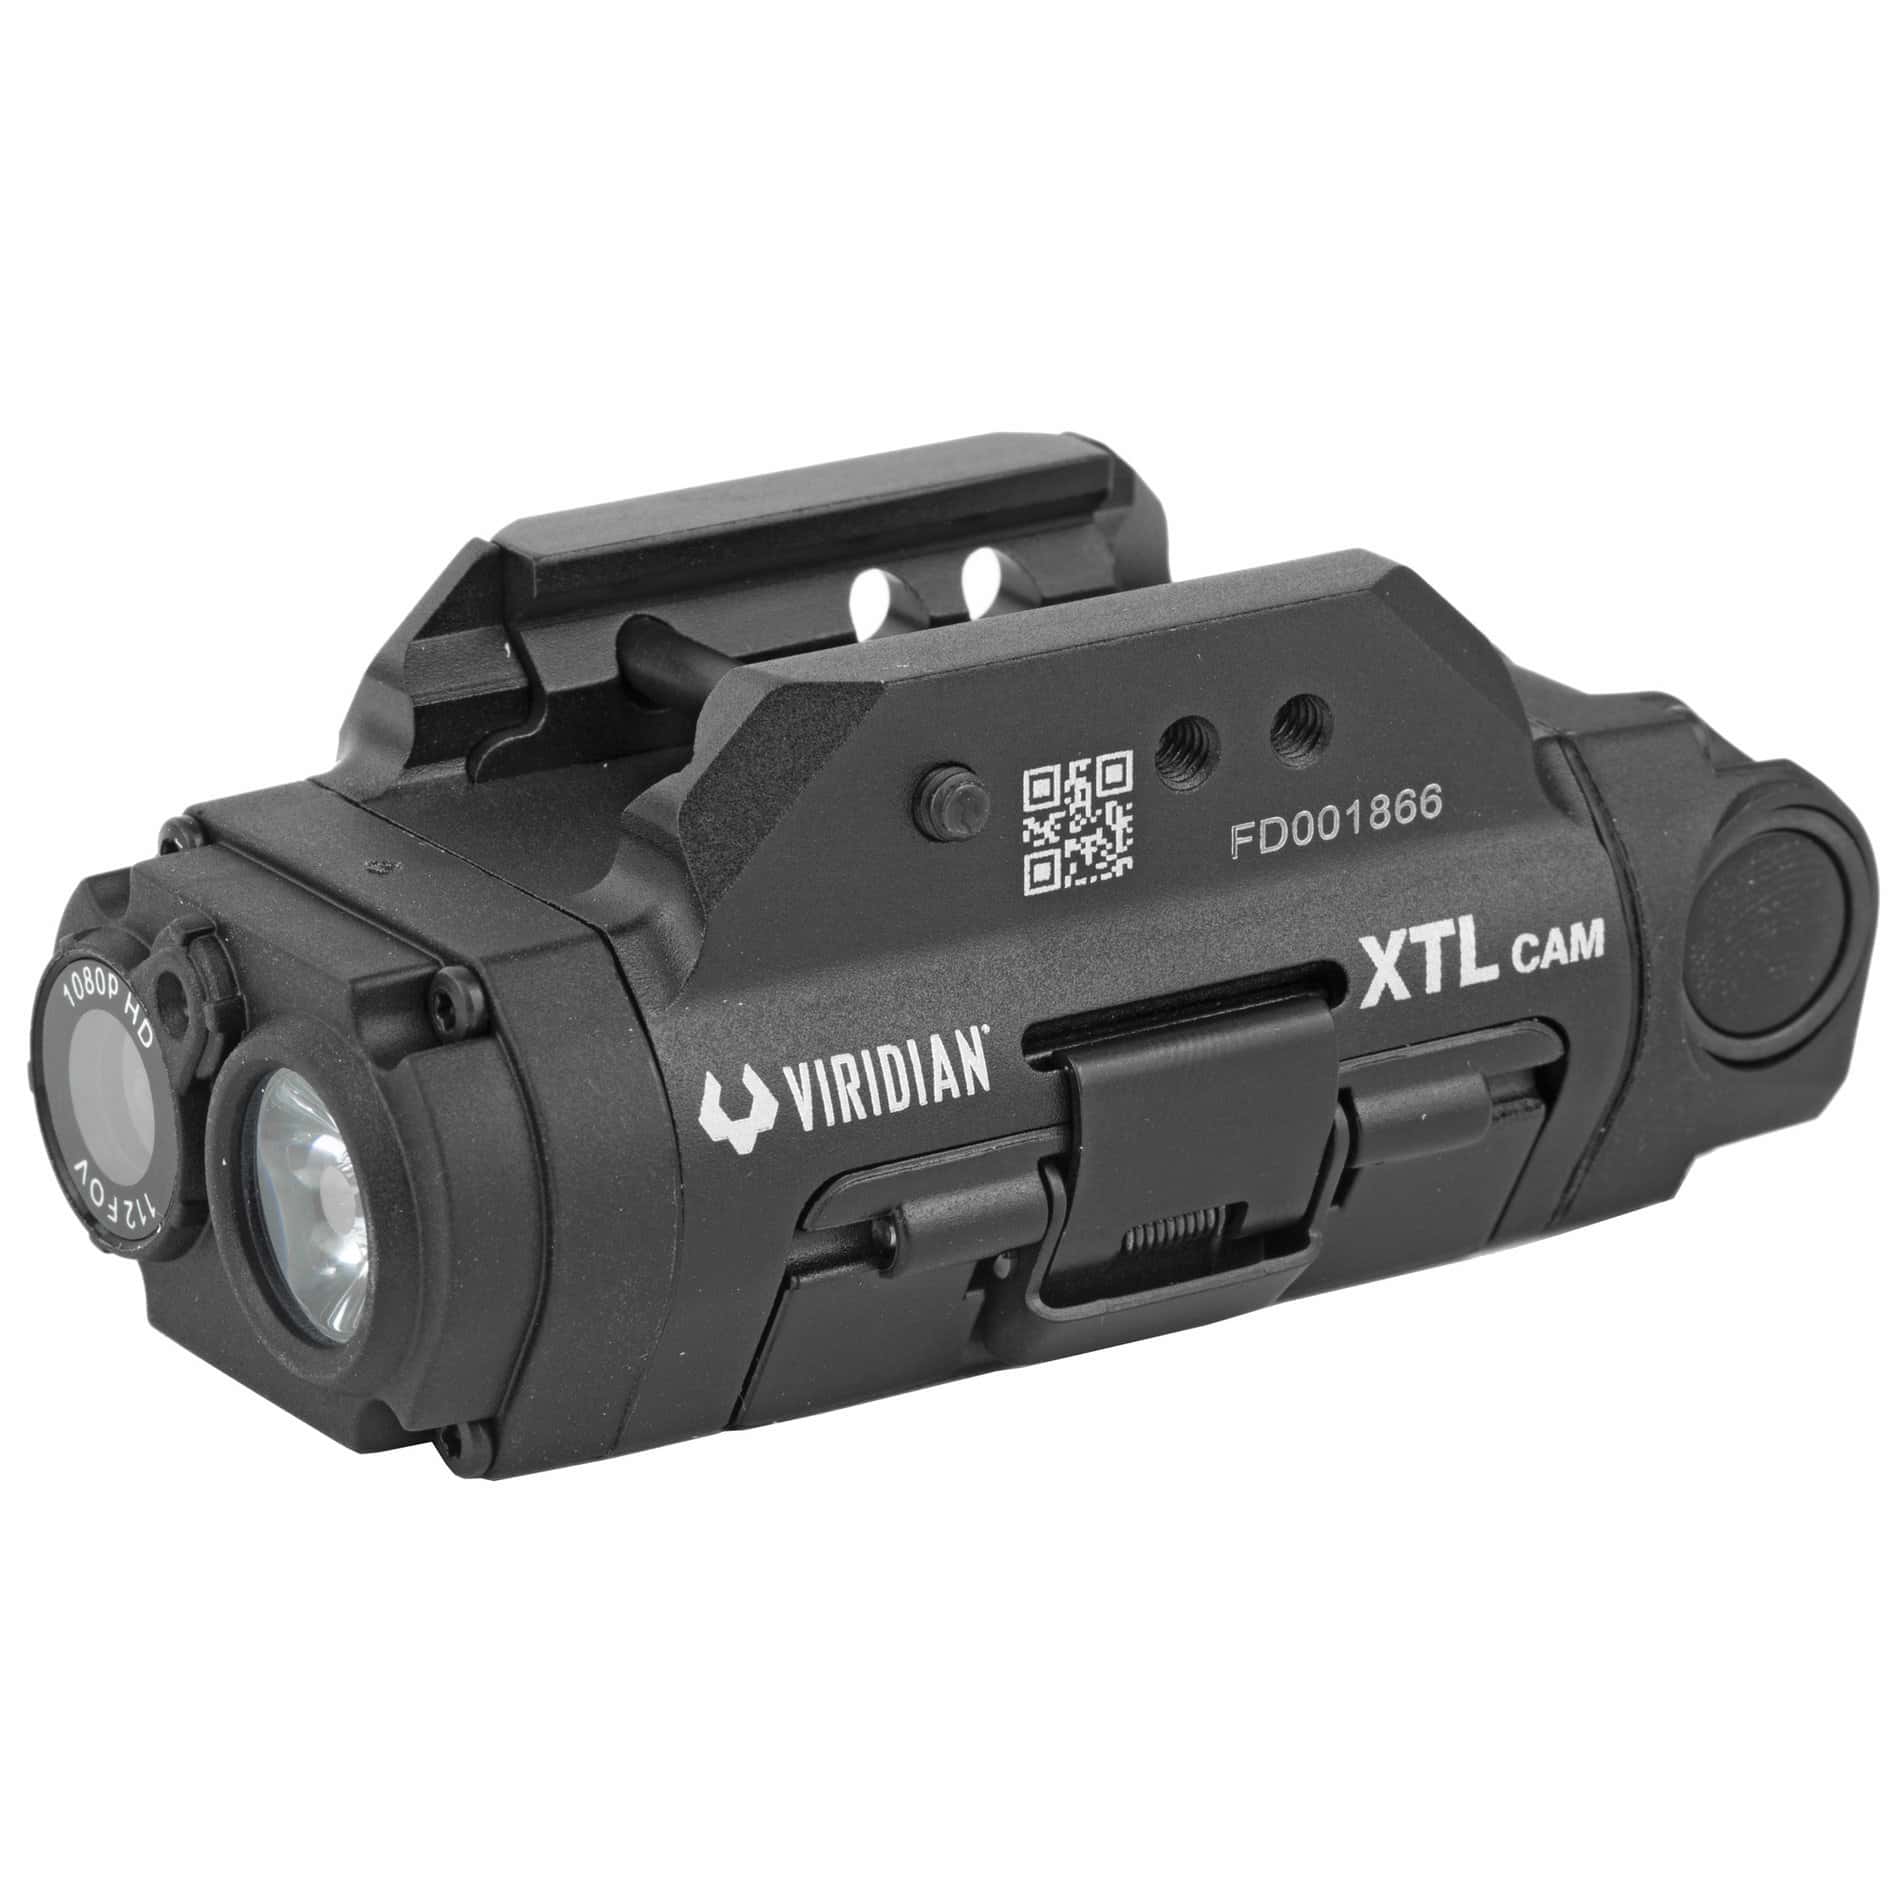 Skip to the end of the images gallery Skip to the beginning of the images gallery Viridian Weapon Technologies XTLcam Gen 3 w/ Tactical Light and HD Camera